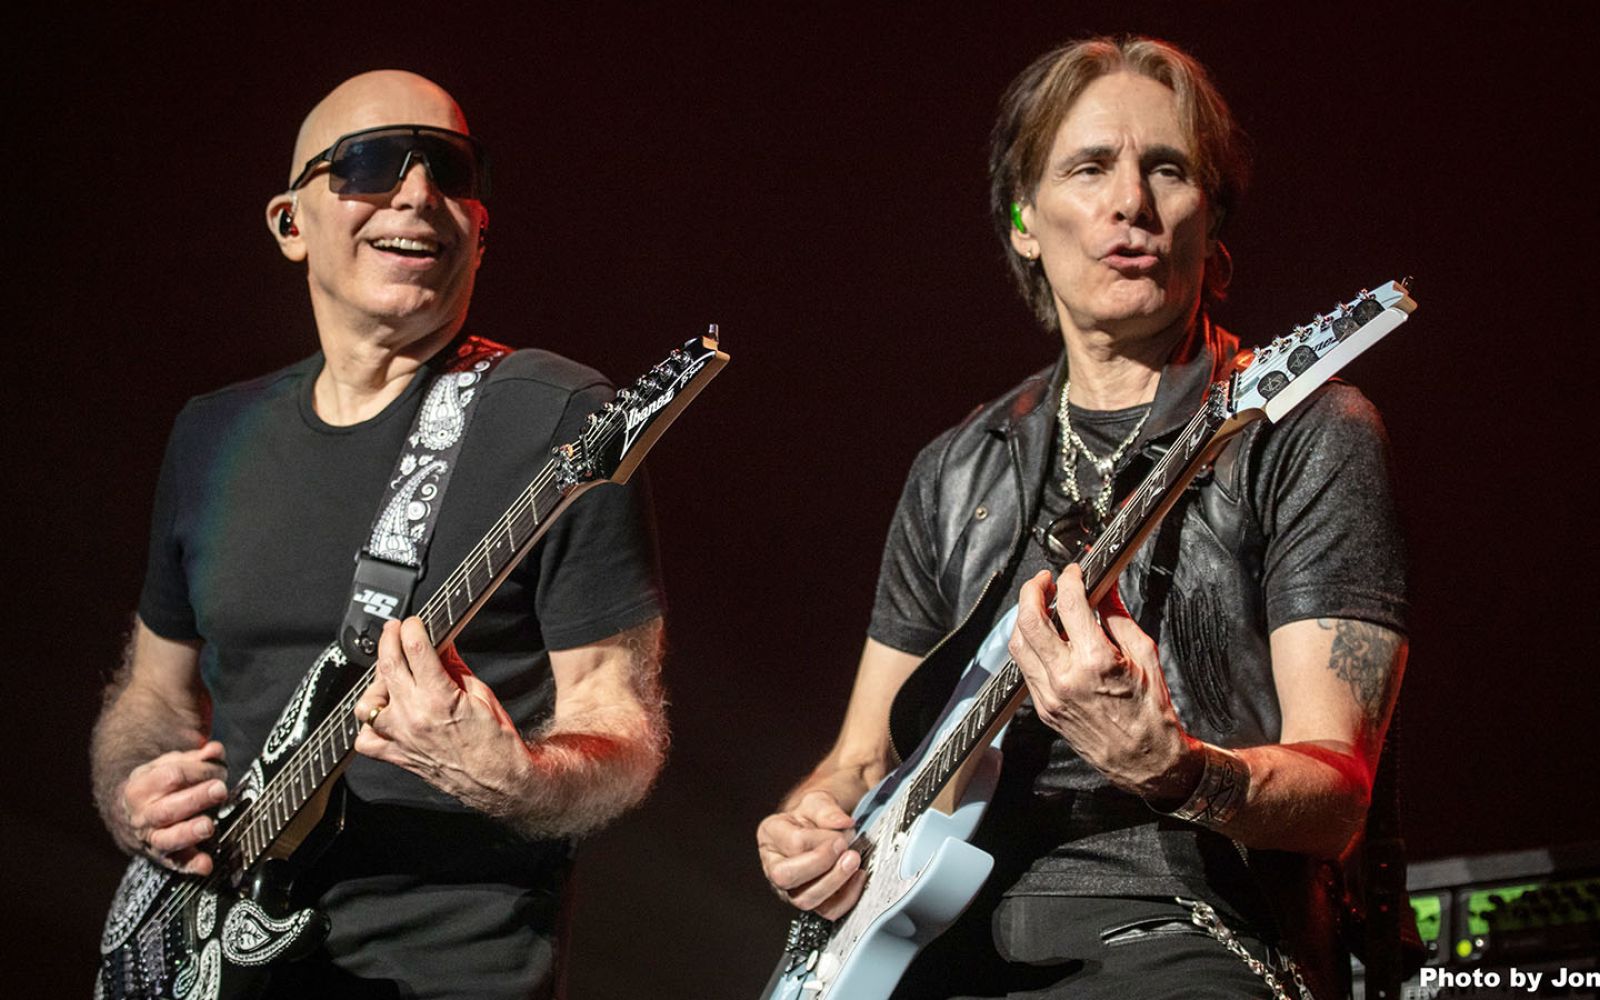 Joe Satriani and Steve Vai will be in town on April 20 to perform at Embassy Theatre.